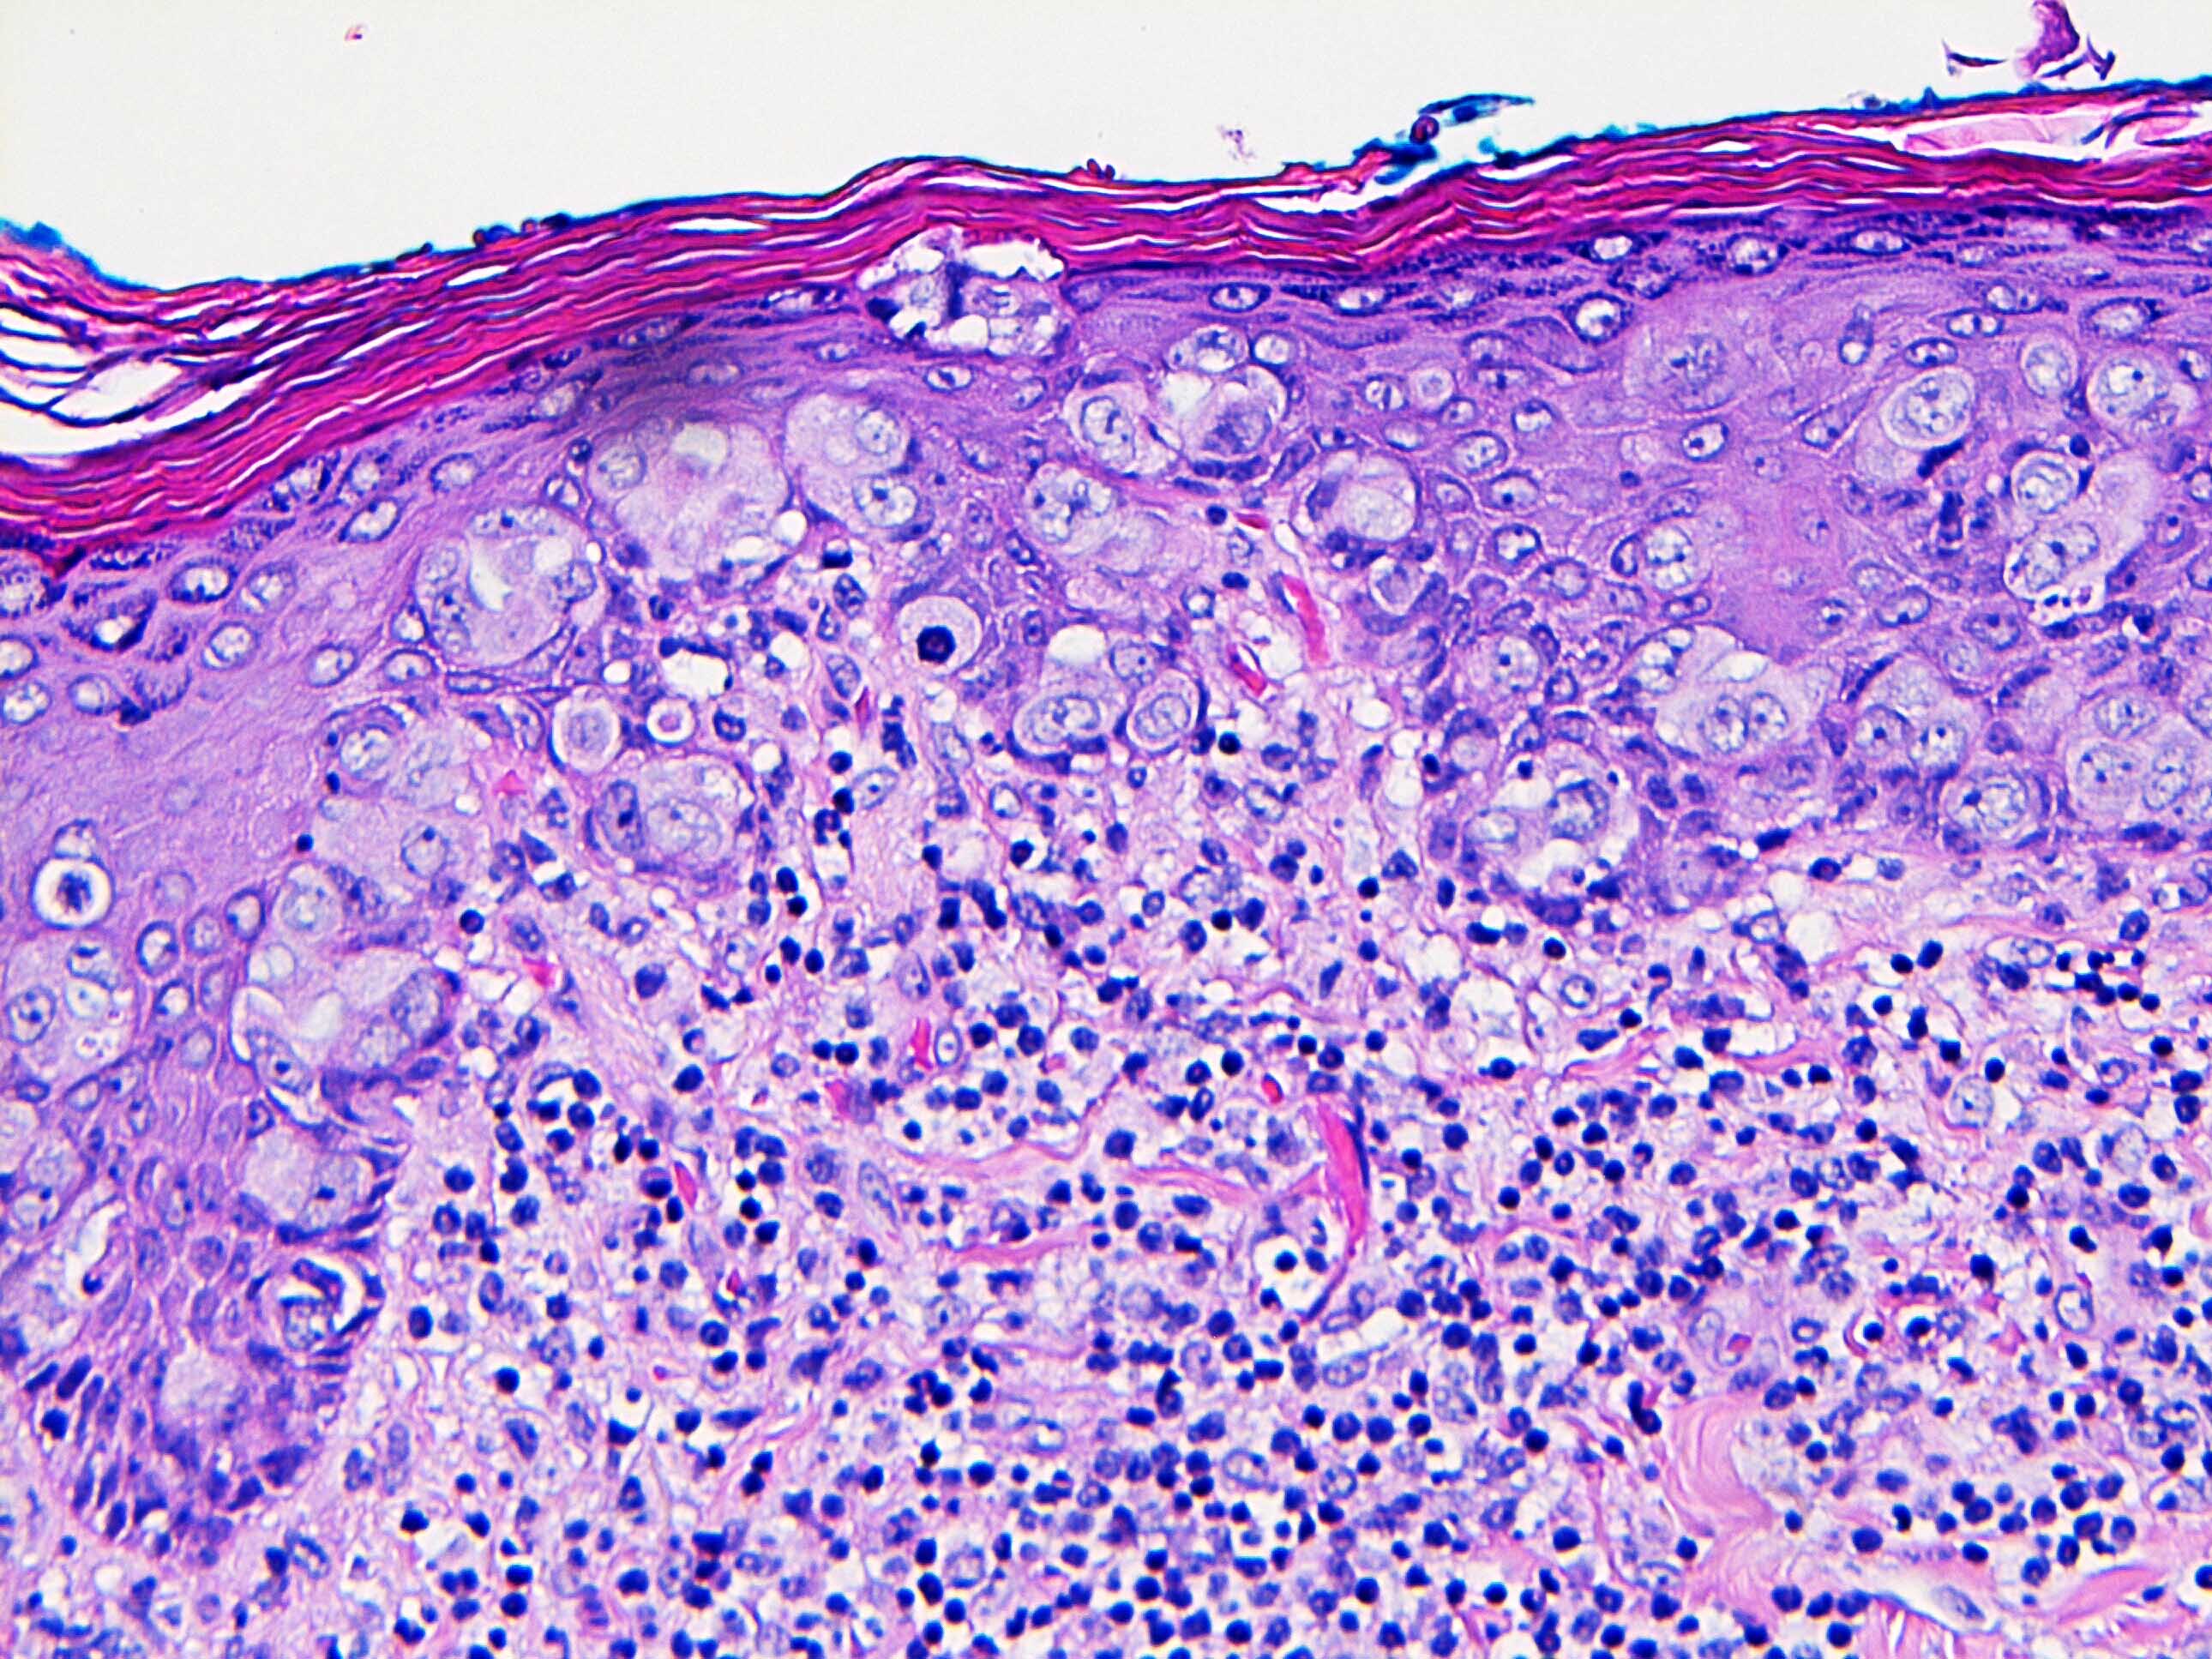 Cytologic features